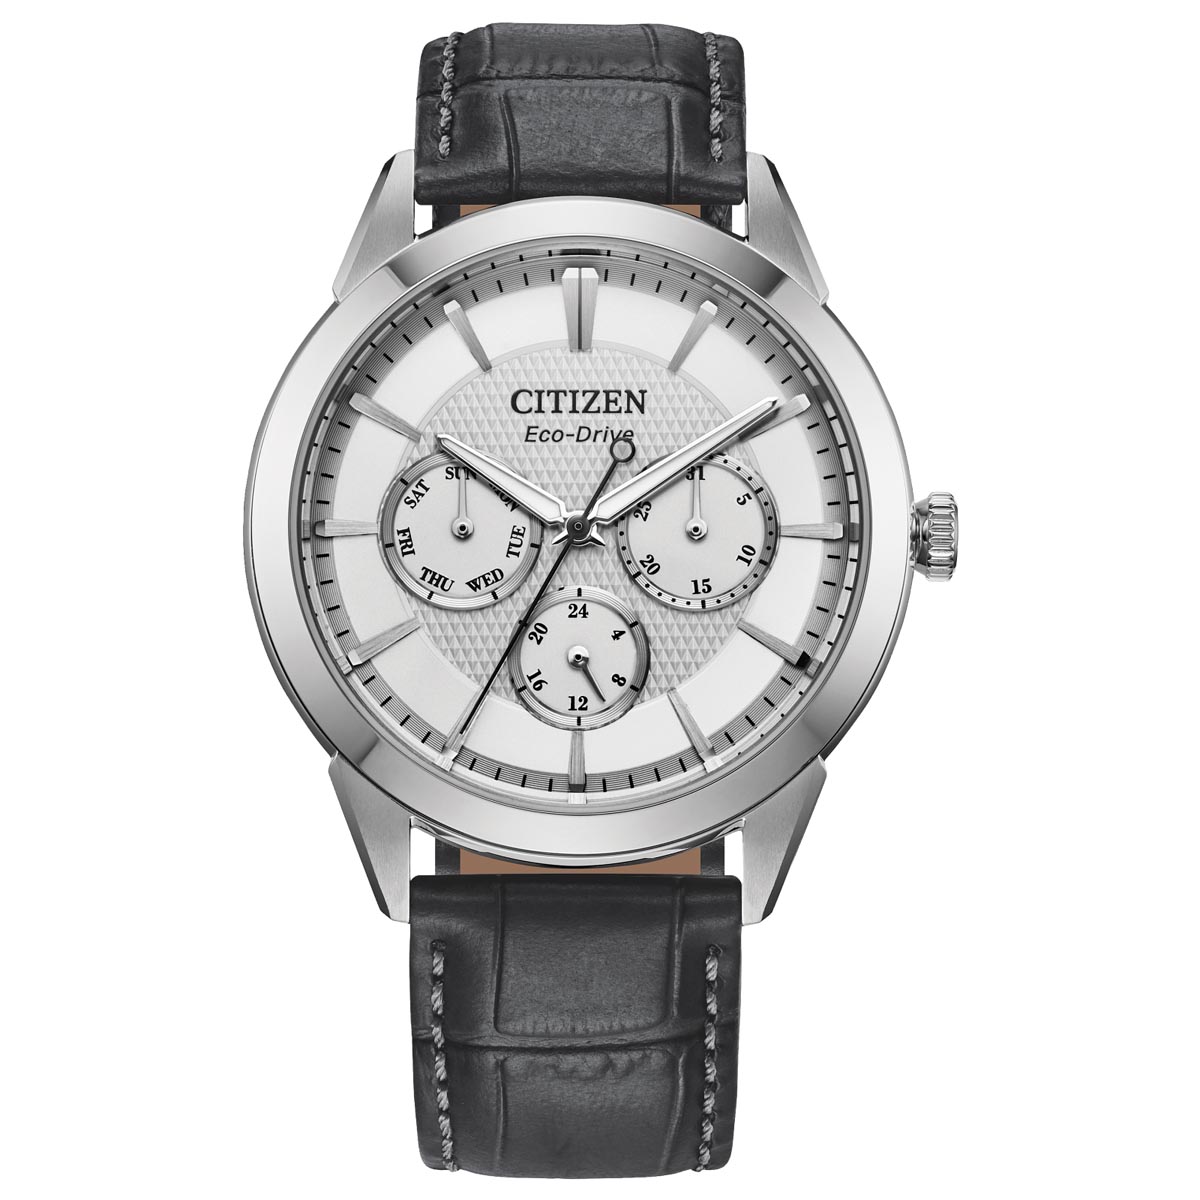 Citizen Classic Mens Watch with White Dial and Black Leather Strap (eco drive movement)